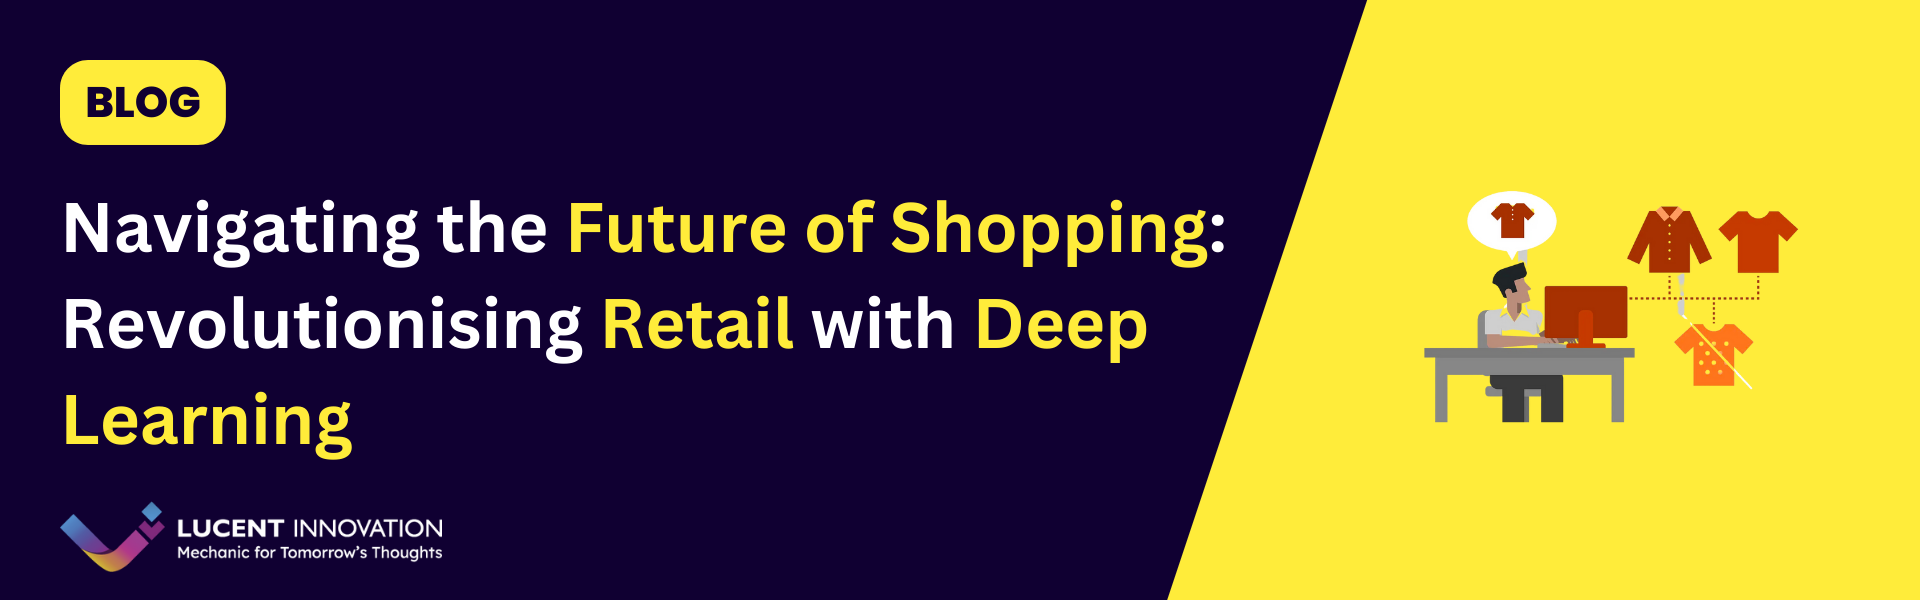 Navigating the Future of Shopping: Revolutionising Retail with Deep Learning